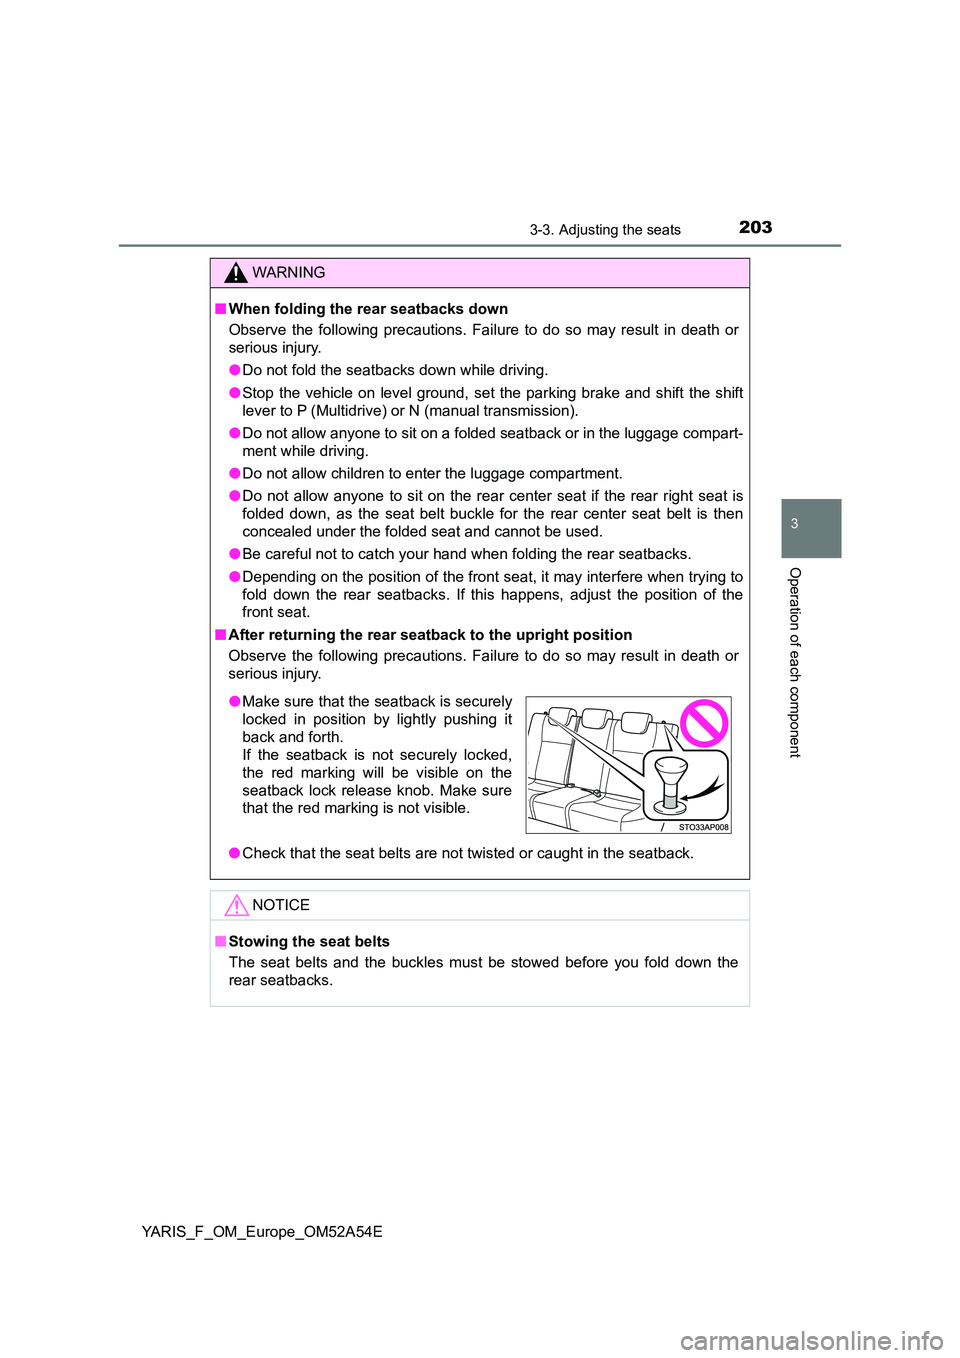 TOYOTA YARIS 2020  Owners Manual 2033-3. Adjusting the seats
3
Operation of each component
YARIS_F_OM_Europe_OM52A54E
WARNING
■When folding the rear seatbacks down 
Observe the following precautions. Failure to do so may result in 